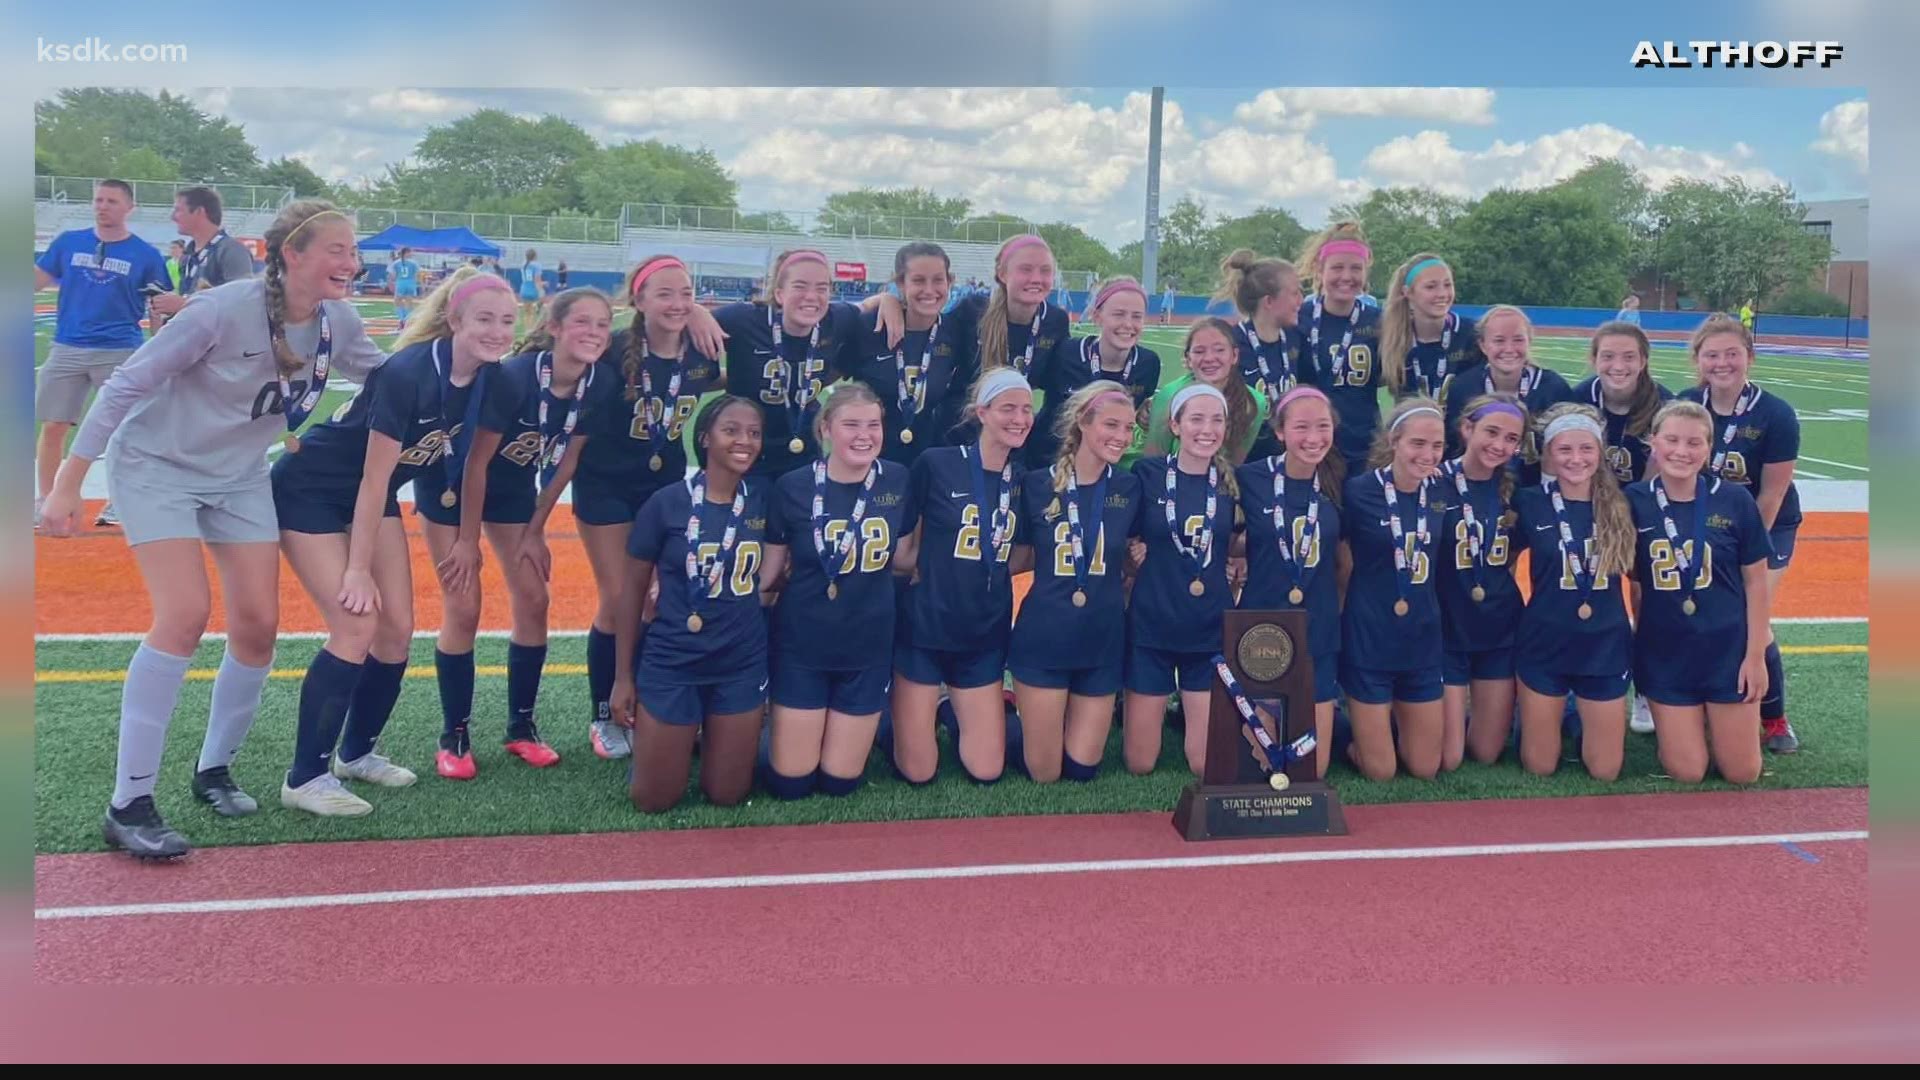 Althoff broke a state record for goals in a championship game